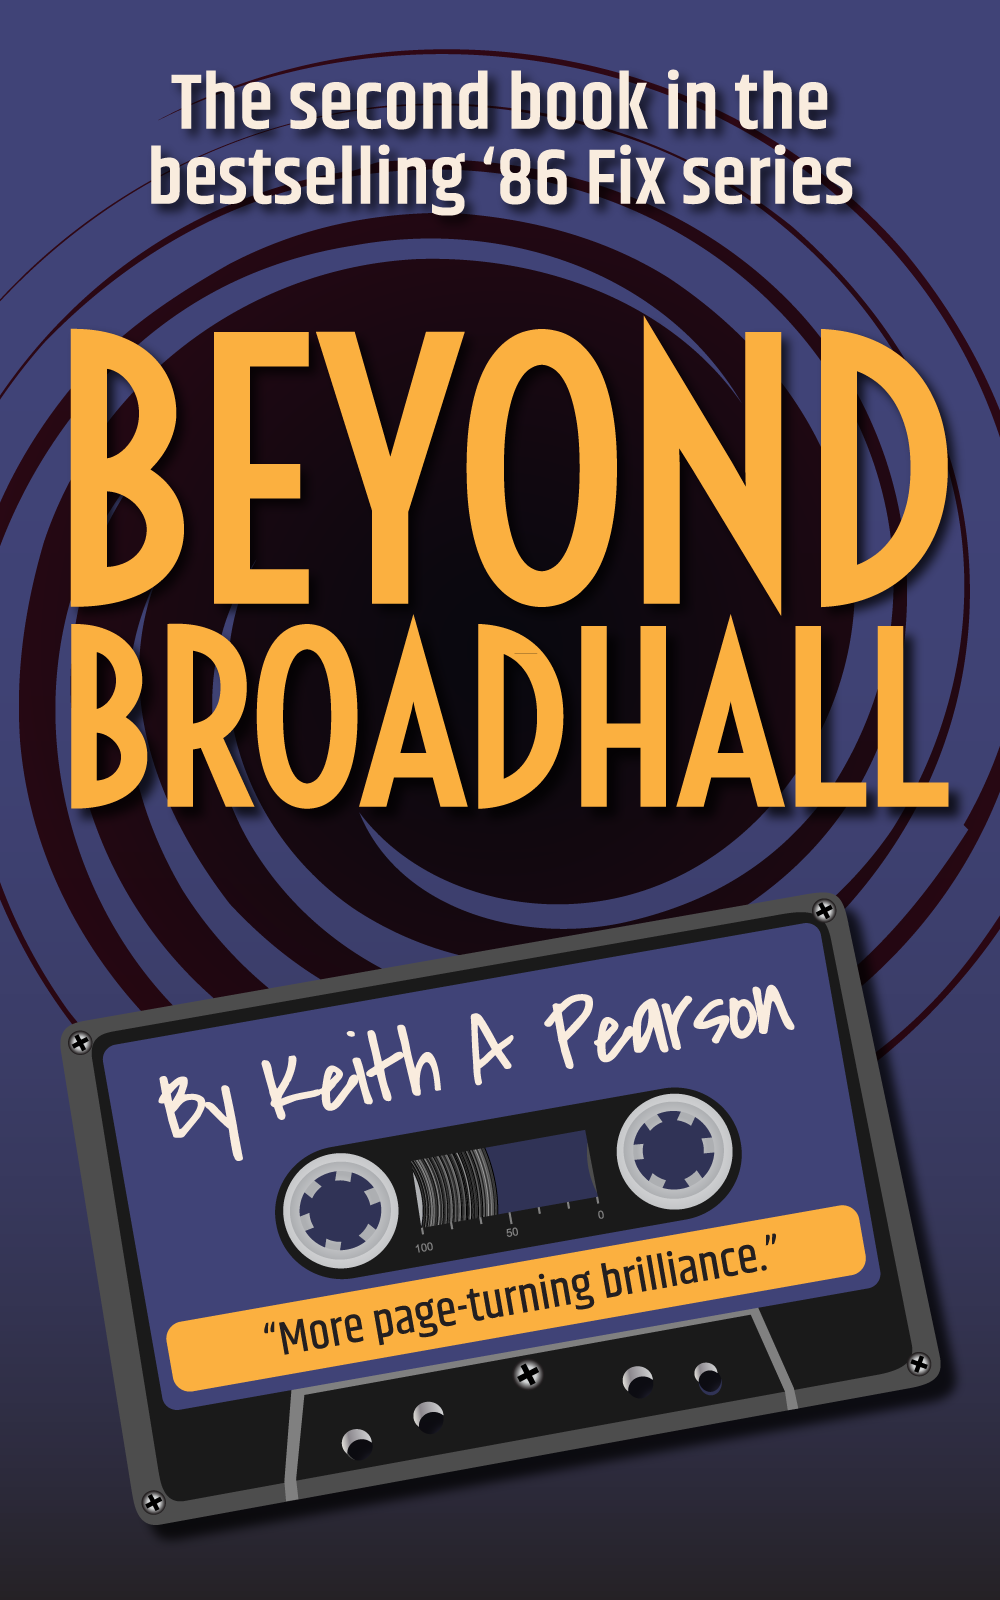 Keith A. Pearson - Beyond Broadall Book